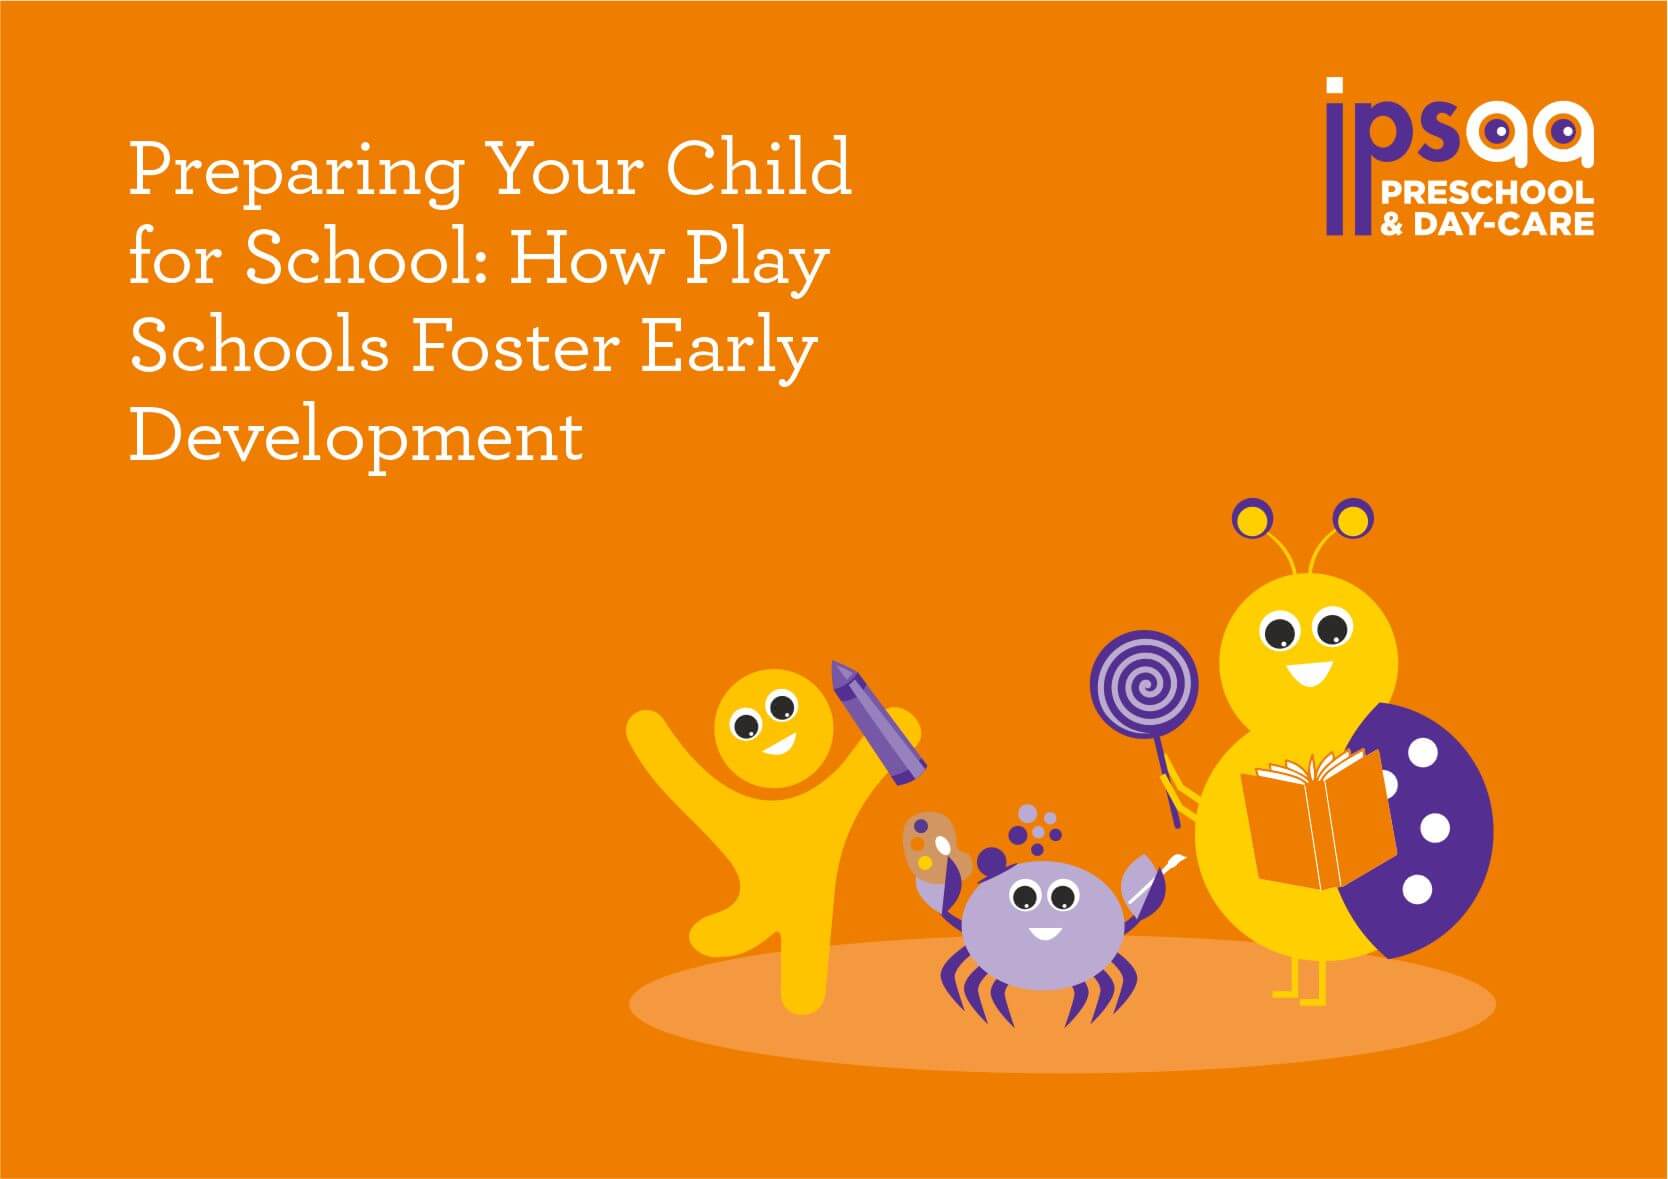 Preparing Your Child for School: How Play Schools Foster Early Development